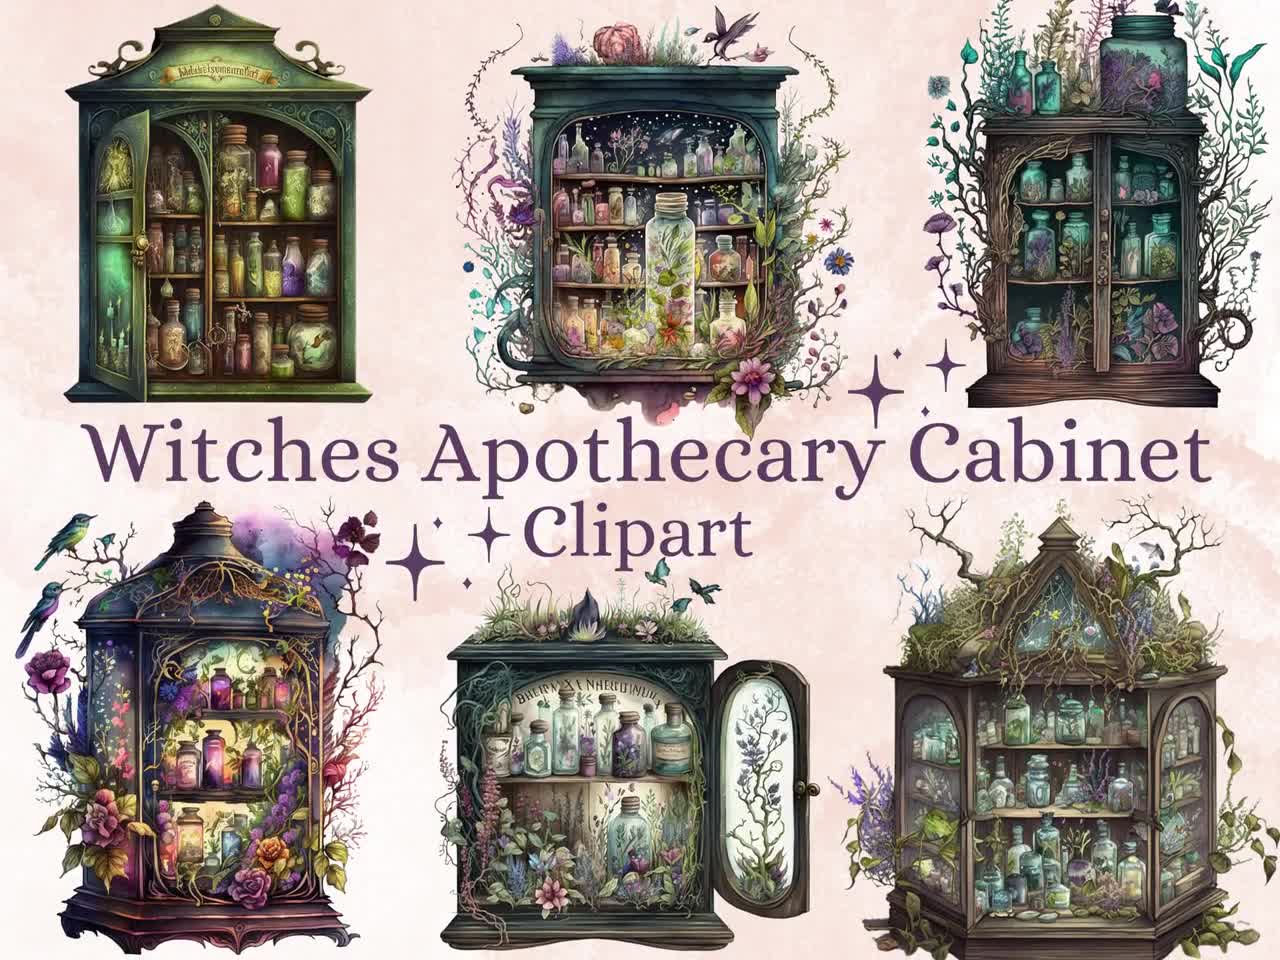 Explore the Fascinating World of the Medieval Apothecary